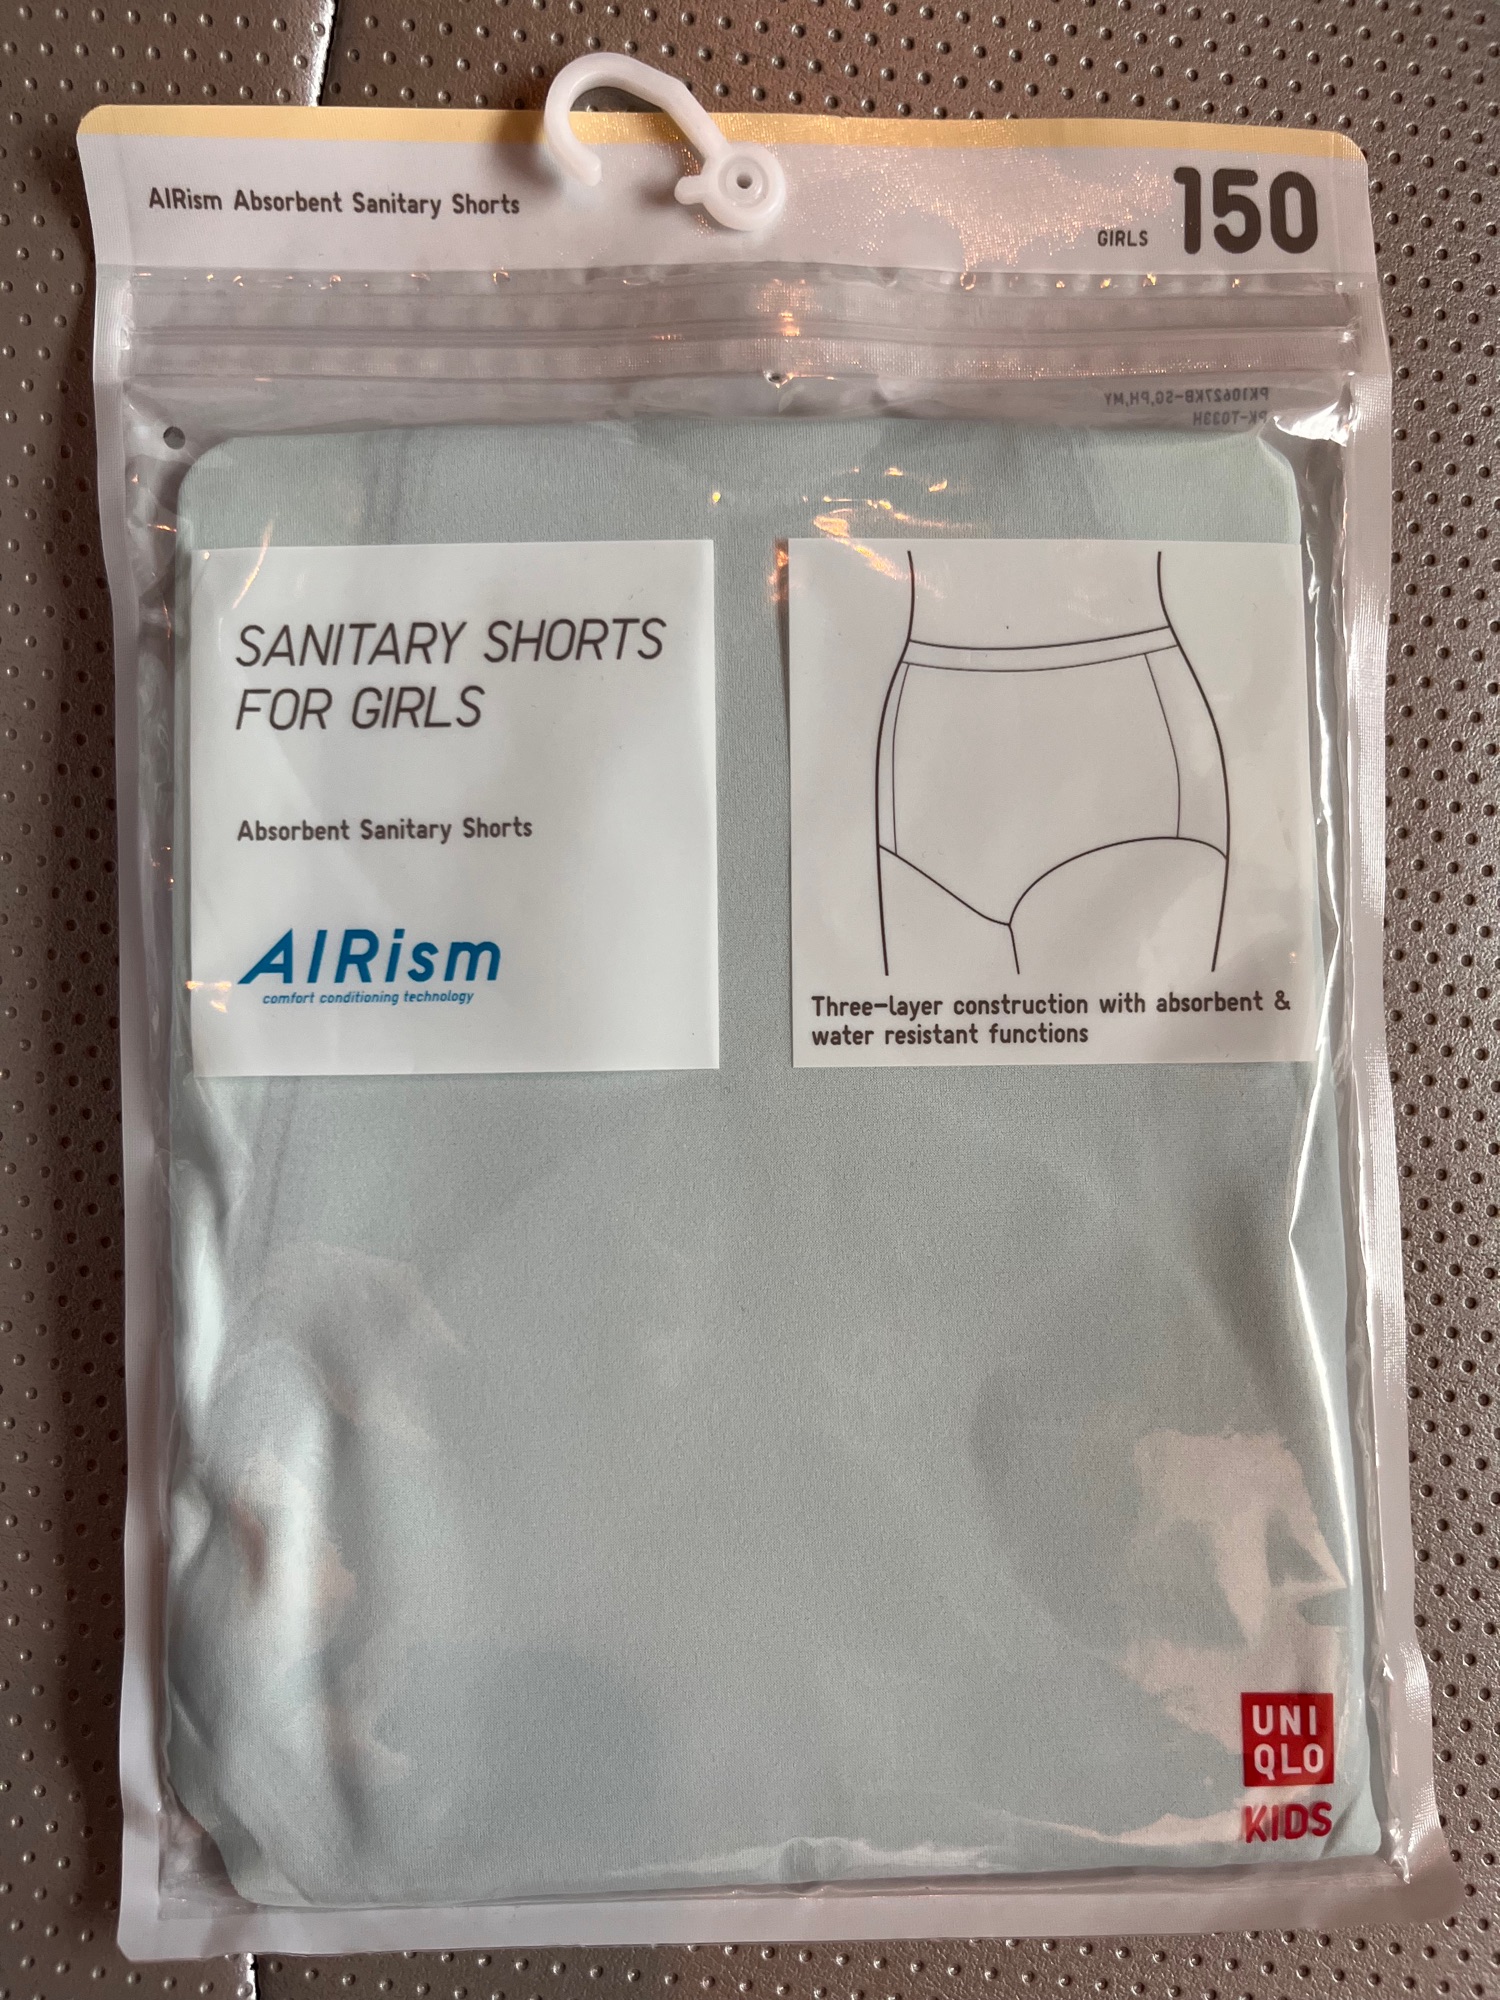 Uniqlo Airism Absorbent Sanitary Shorts (girls)